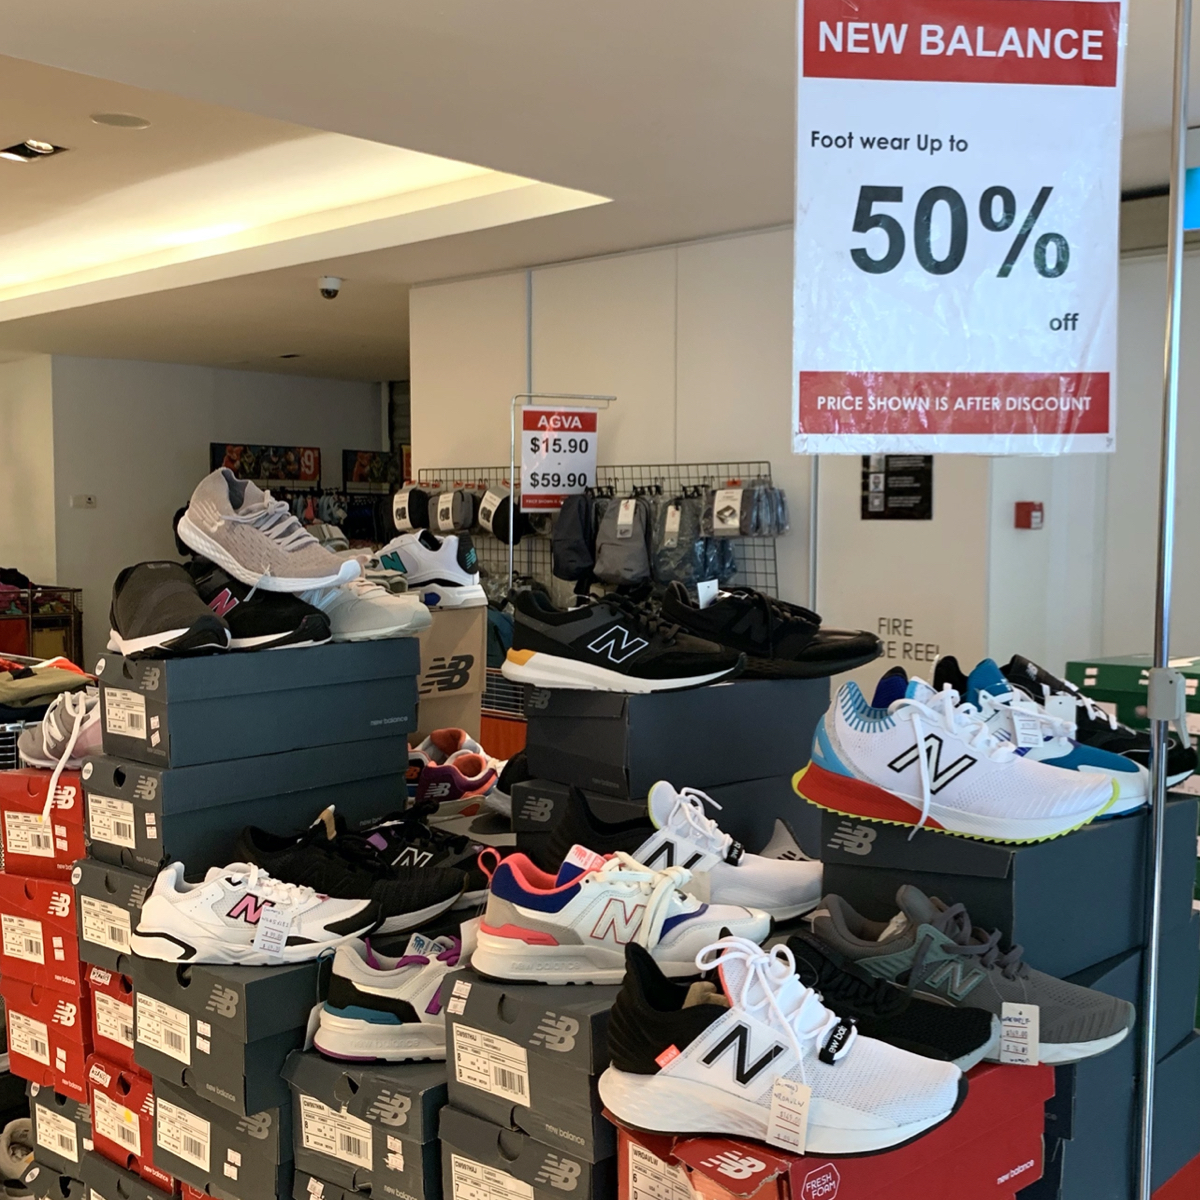 LINK Outlet Sale has up to 80% off branded shoes, bags, accessories & more (30 Jul – 2 Aug 2020) - 15